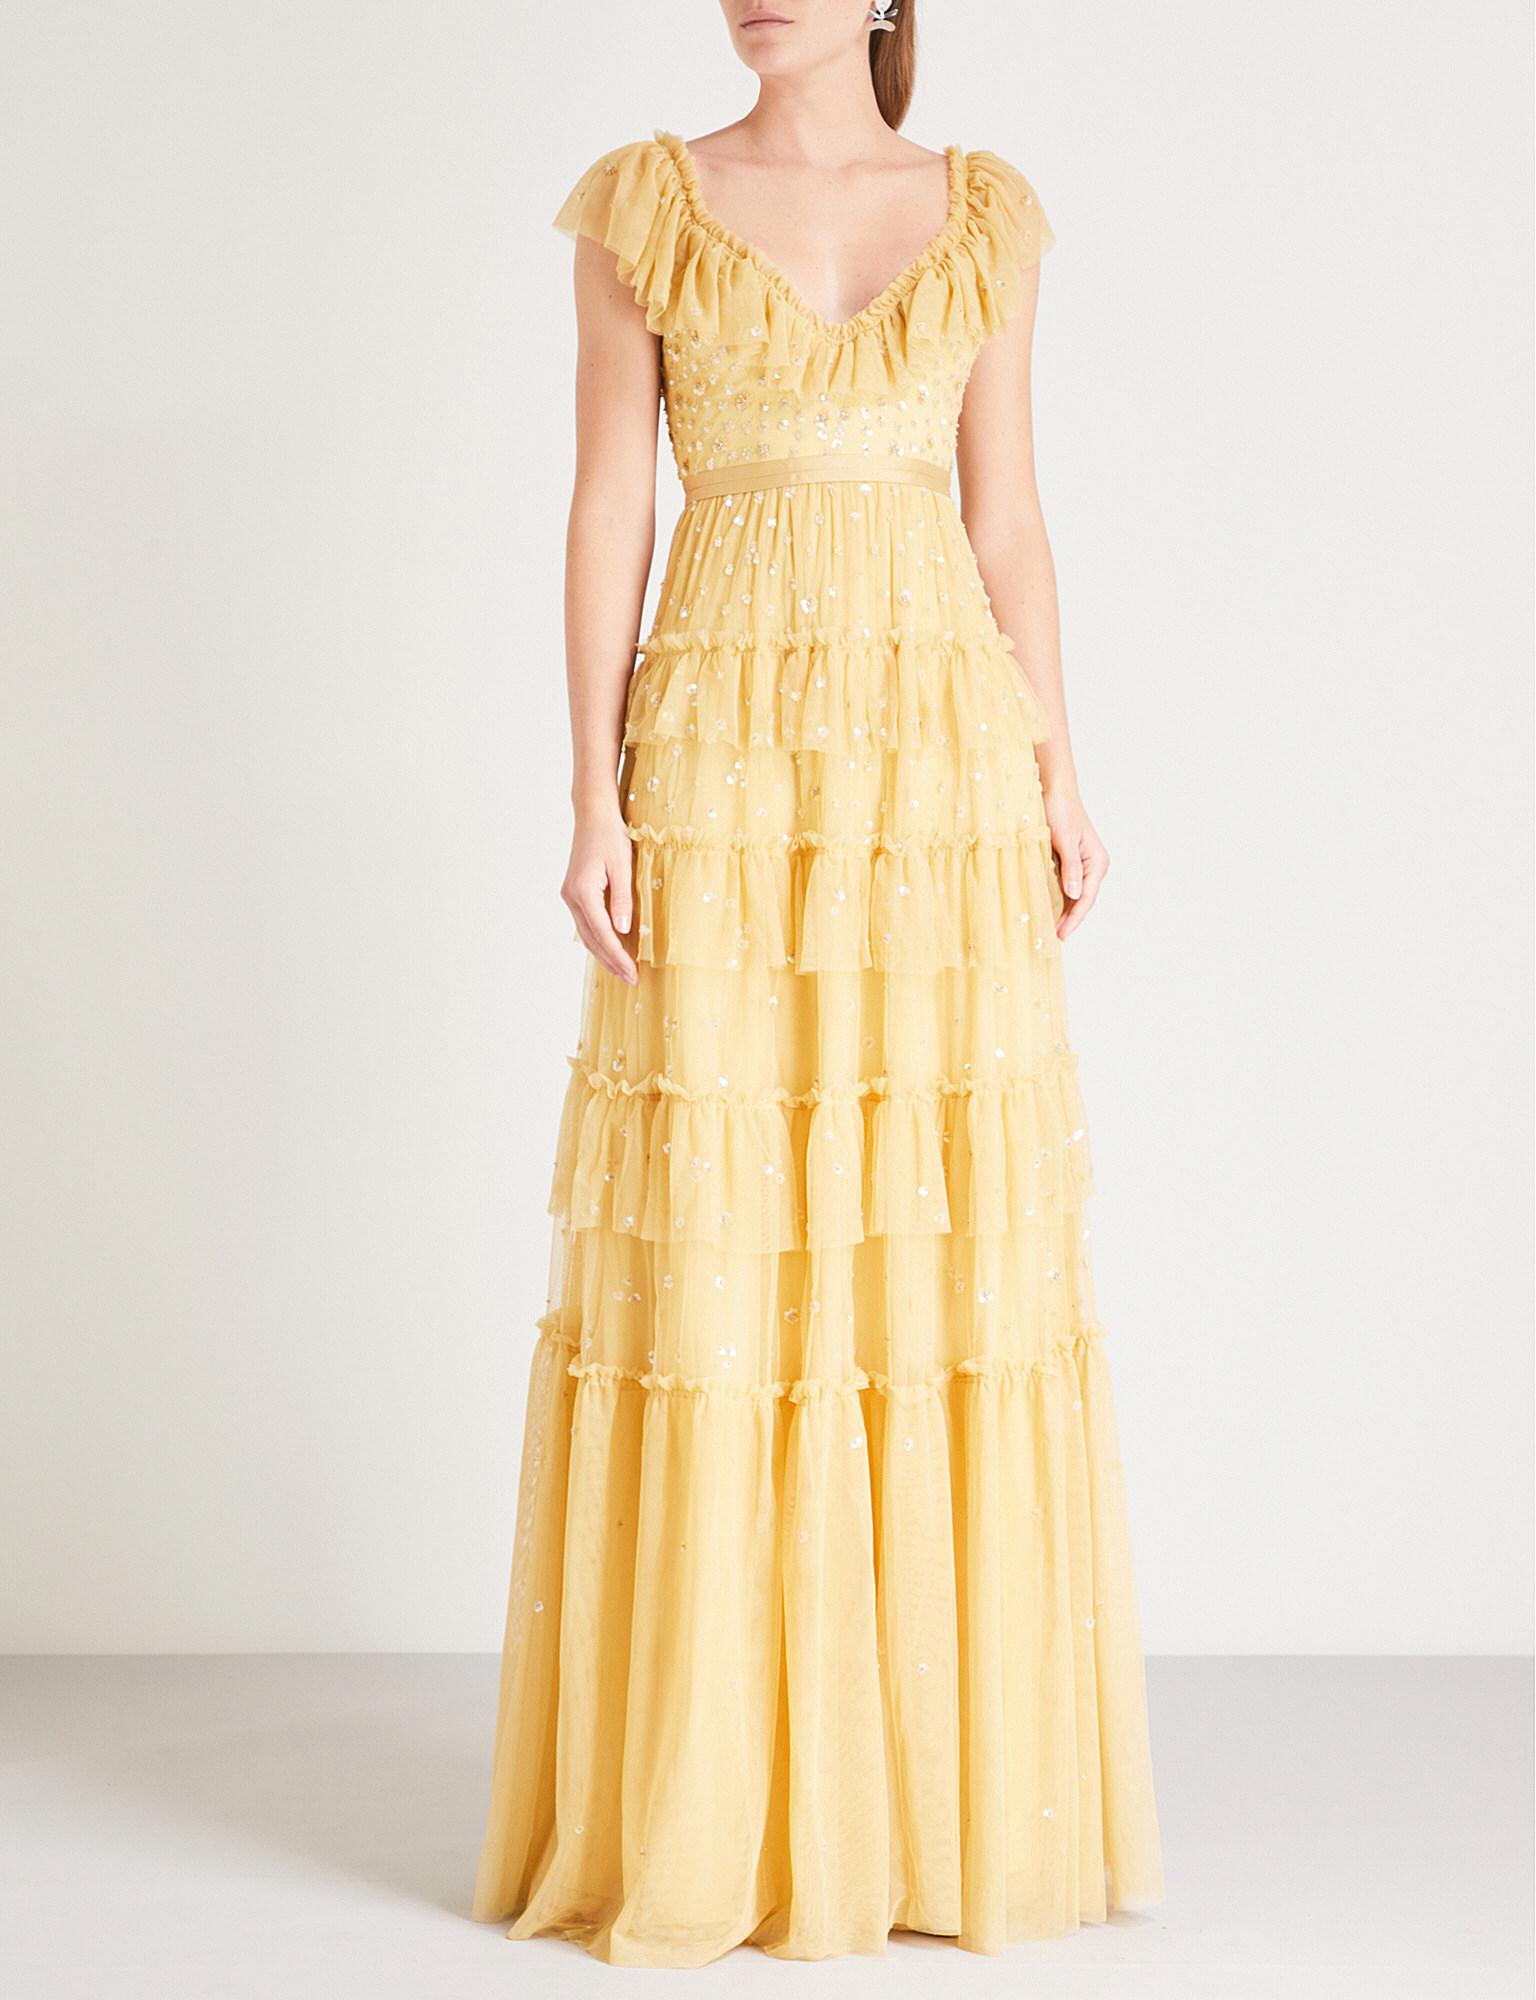 Needle & Thread Sunburst Sequin-embellished Tulle Gown in Yellow | Lyst UK